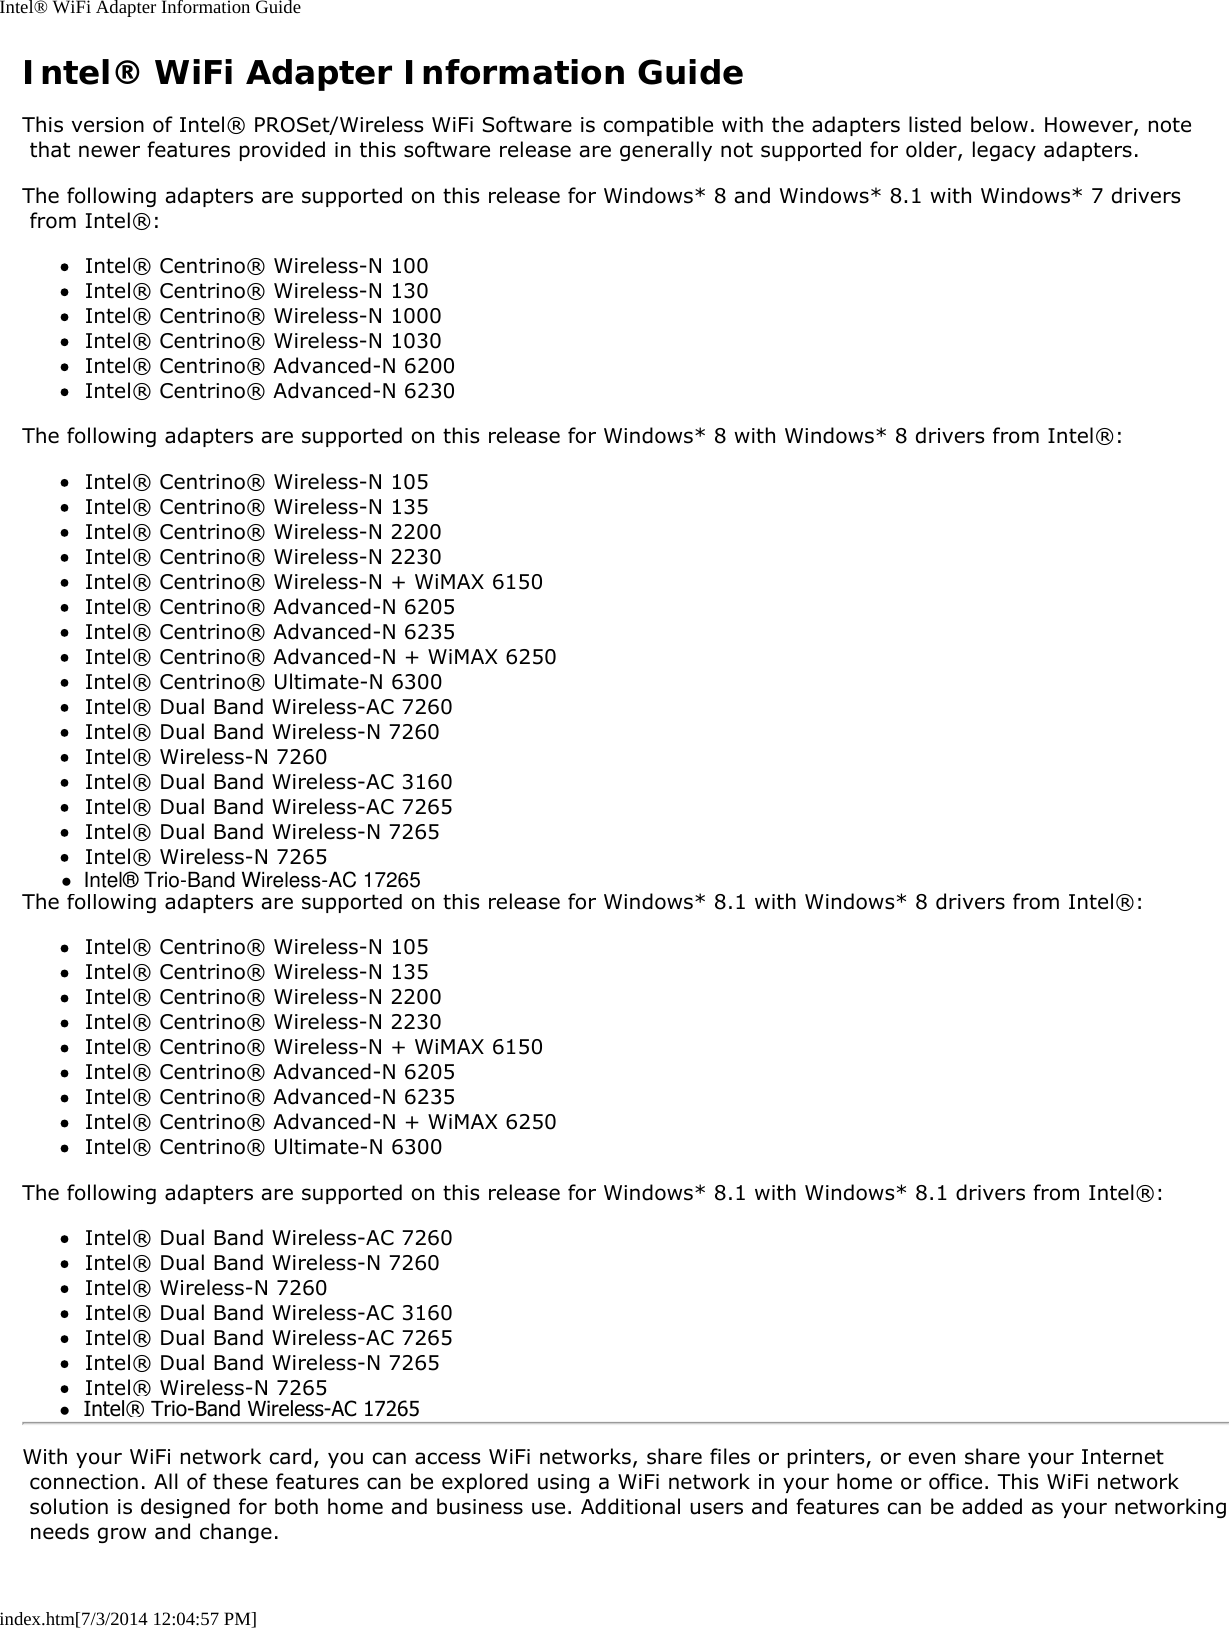 Intel® WiFi Adapter Information Guideindex.htm[7/3/2014 12:04:57 PM]Intel® WiFi Adapter Information GuideThis version of Intel® PROSet/Wireless WiFi Software is compatible with the adapters listed below. However, note that newer features provided in this software release are generally not supported for older, legacy adapters.The following adapters are supported on this release for Windows* 8 and Windows* 8.1 with Windows* 7 drivers from Intel®:Intel® Centrino® Wireless-N 100Intel® Centrino® Wireless-N 130Intel® Centrino® Wireless-N 1000Intel® Centrino® Wireless-N 1030Intel® Centrino® Advanced-N 6200Intel® Centrino® Advanced-N 6230The following adapters are supported on this release for Windows* 8 with Windows* 8 drivers from Intel®:Intel® Centrino® Wireless-N 105Intel® Centrino® Wireless-N 135Intel® Centrino® Wireless-N 2200Intel® Centrino® Wireless-N 2230Intel® Centrino® Wireless-N + WiMAX 6150Intel® Centrino® Advanced-N 6205Intel® Centrino® Advanced-N 6235Intel® Centrino® Advanced-N + WiMAX 6250Intel® Centrino® Ultimate-N 6300Intel® Dual Band Wireless-AC 7260Intel® Dual Band Wireless-N 7260Intel® Wireless-N 7260Intel® Dual Band Wireless-AC 3160Intel® Dual Band Wireless-AC 7265Intel® Dual Band Wireless-N 7265Intel® Wireless-N 7265The following adapters are supported on this release for Windows* 8.1 with Windows* 8 drivers from Intel®:Intel® Centrino® Wireless-N 105Intel® Centrino® Wireless-N 135Intel® Centrino® Wireless-N 2200Intel® Centrino® Wireless-N 2230Intel® Centrino® Wireless-N + WiMAX 6150Intel® Centrino® Advanced-N 6205Intel® Centrino® Advanced-N 6235Intel® Centrino® Advanced-N + WiMAX 6250Intel® Centrino® Ultimate-N 6300The following adapters are supported on this release for Windows* 8.1 with Windows* 8.1 drivers from Intel®:Intel® Dual Band Wireless-AC 7260Intel® Dual Band Wireless-N 7260Intel® Wireless-N 7260Intel® Dual Band Wireless-AC 3160Intel® Dual Band Wireless-AC 7265Intel® Dual Band Wireless-N 7265Intel® Wireless-N 7265With your WiFi network card, you can access WiFi networks, share files or printers, or even share your Internet connection. All of these features can be explored using a WiFi network in your home or office. This WiFi network solution is designed for both home and business use. Additional users and features can be added as your networking needs grow and change.●  Intel® Trio-Band Wireless-AC 17265●  Intel® Trio-Band Wireless-AC 17265